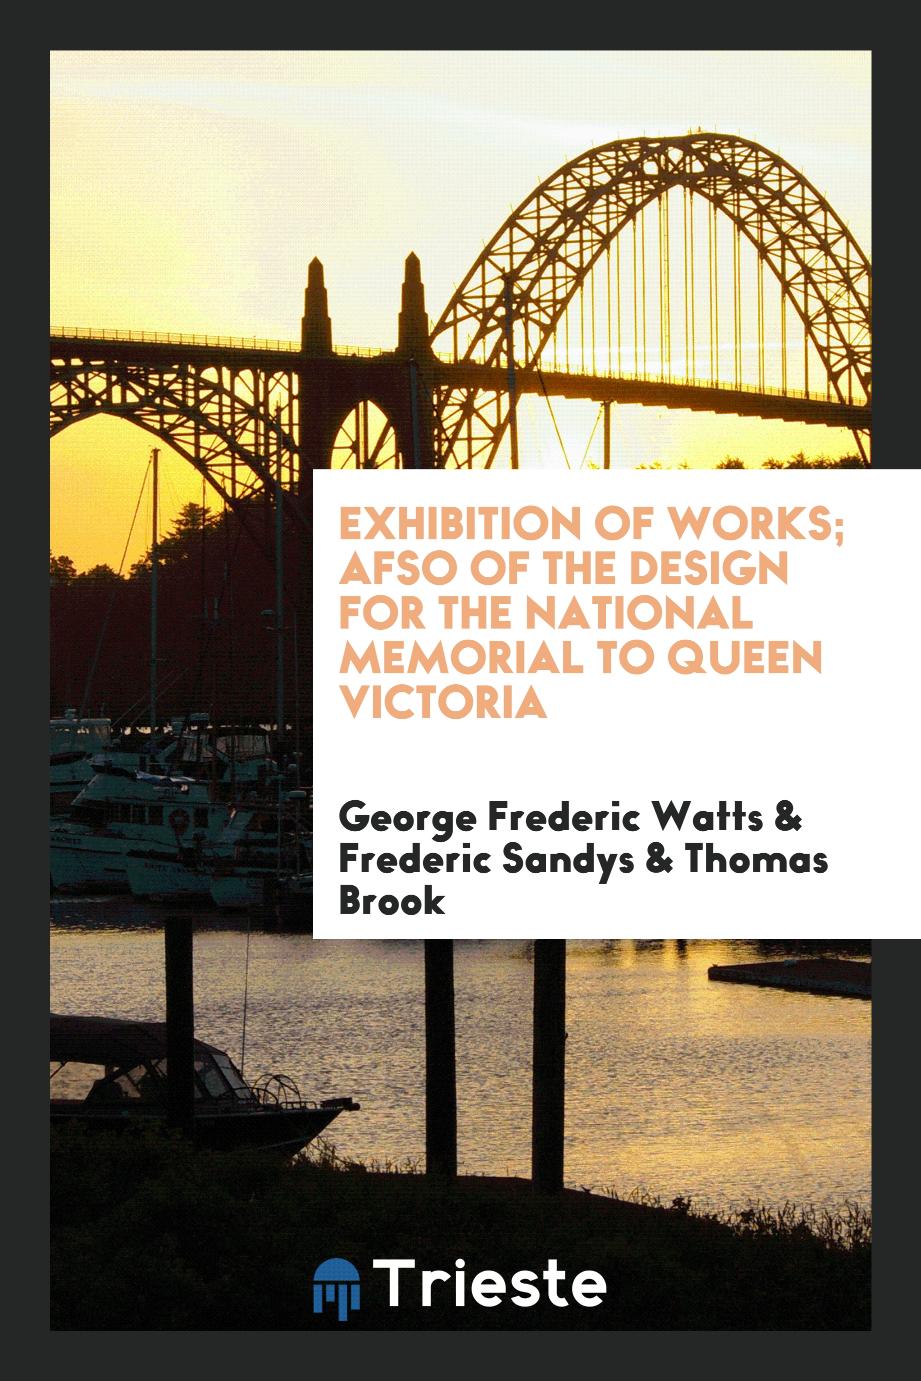 Exhibition of Works; afso of the design for the national memorial to Queen Victoria